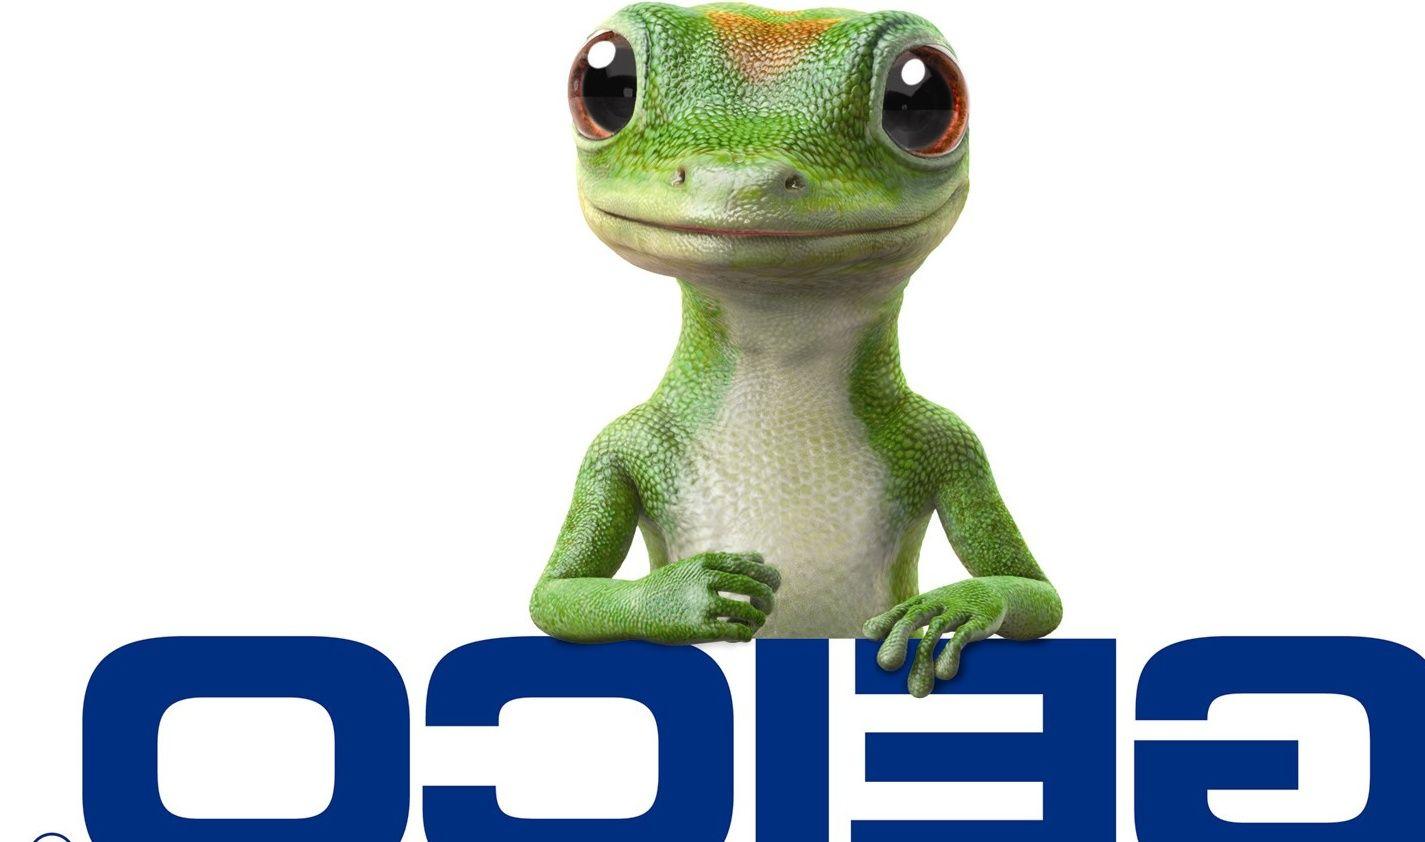 GEICO Gecko Logo - Pictures of The Geico Gecko on Animal Picture Society